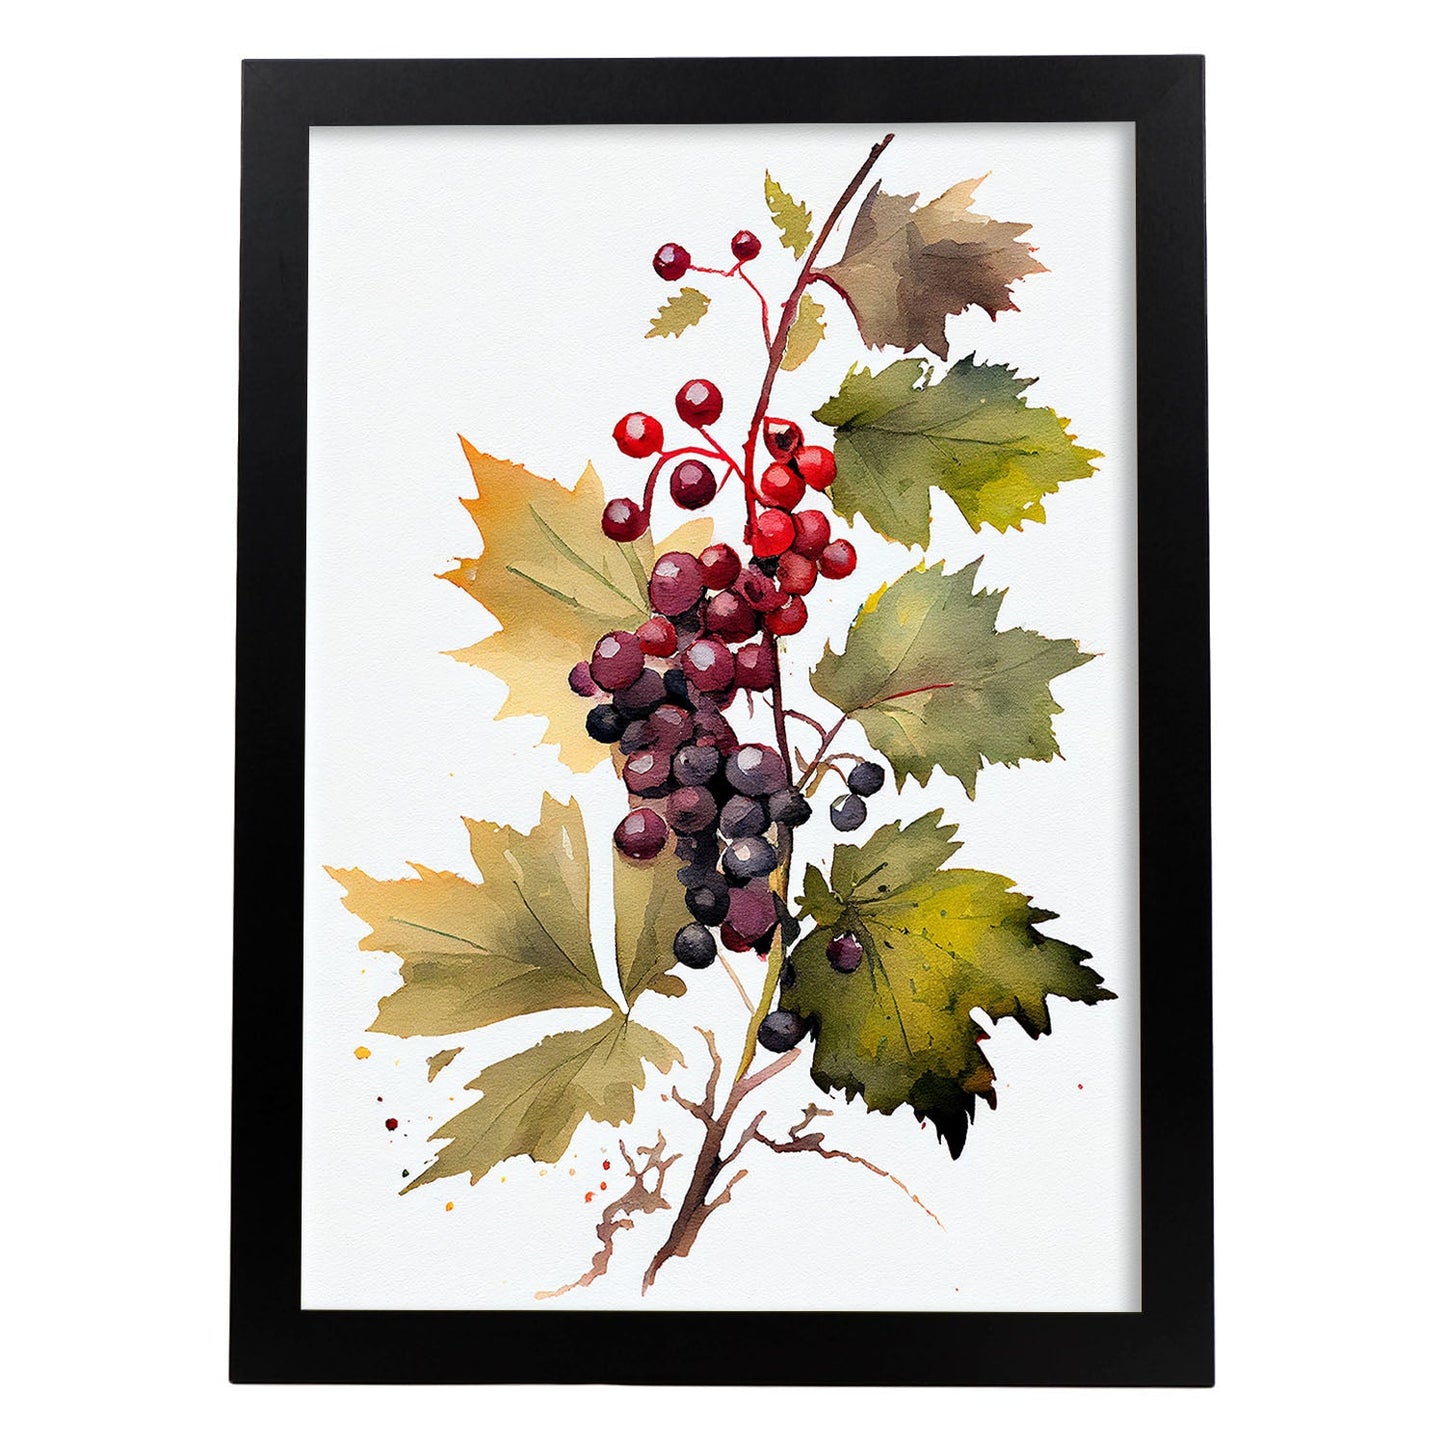 Nacnic minimalist Currant. Aesthetic Wall Art Prints for Bedroom or Living Room Design.